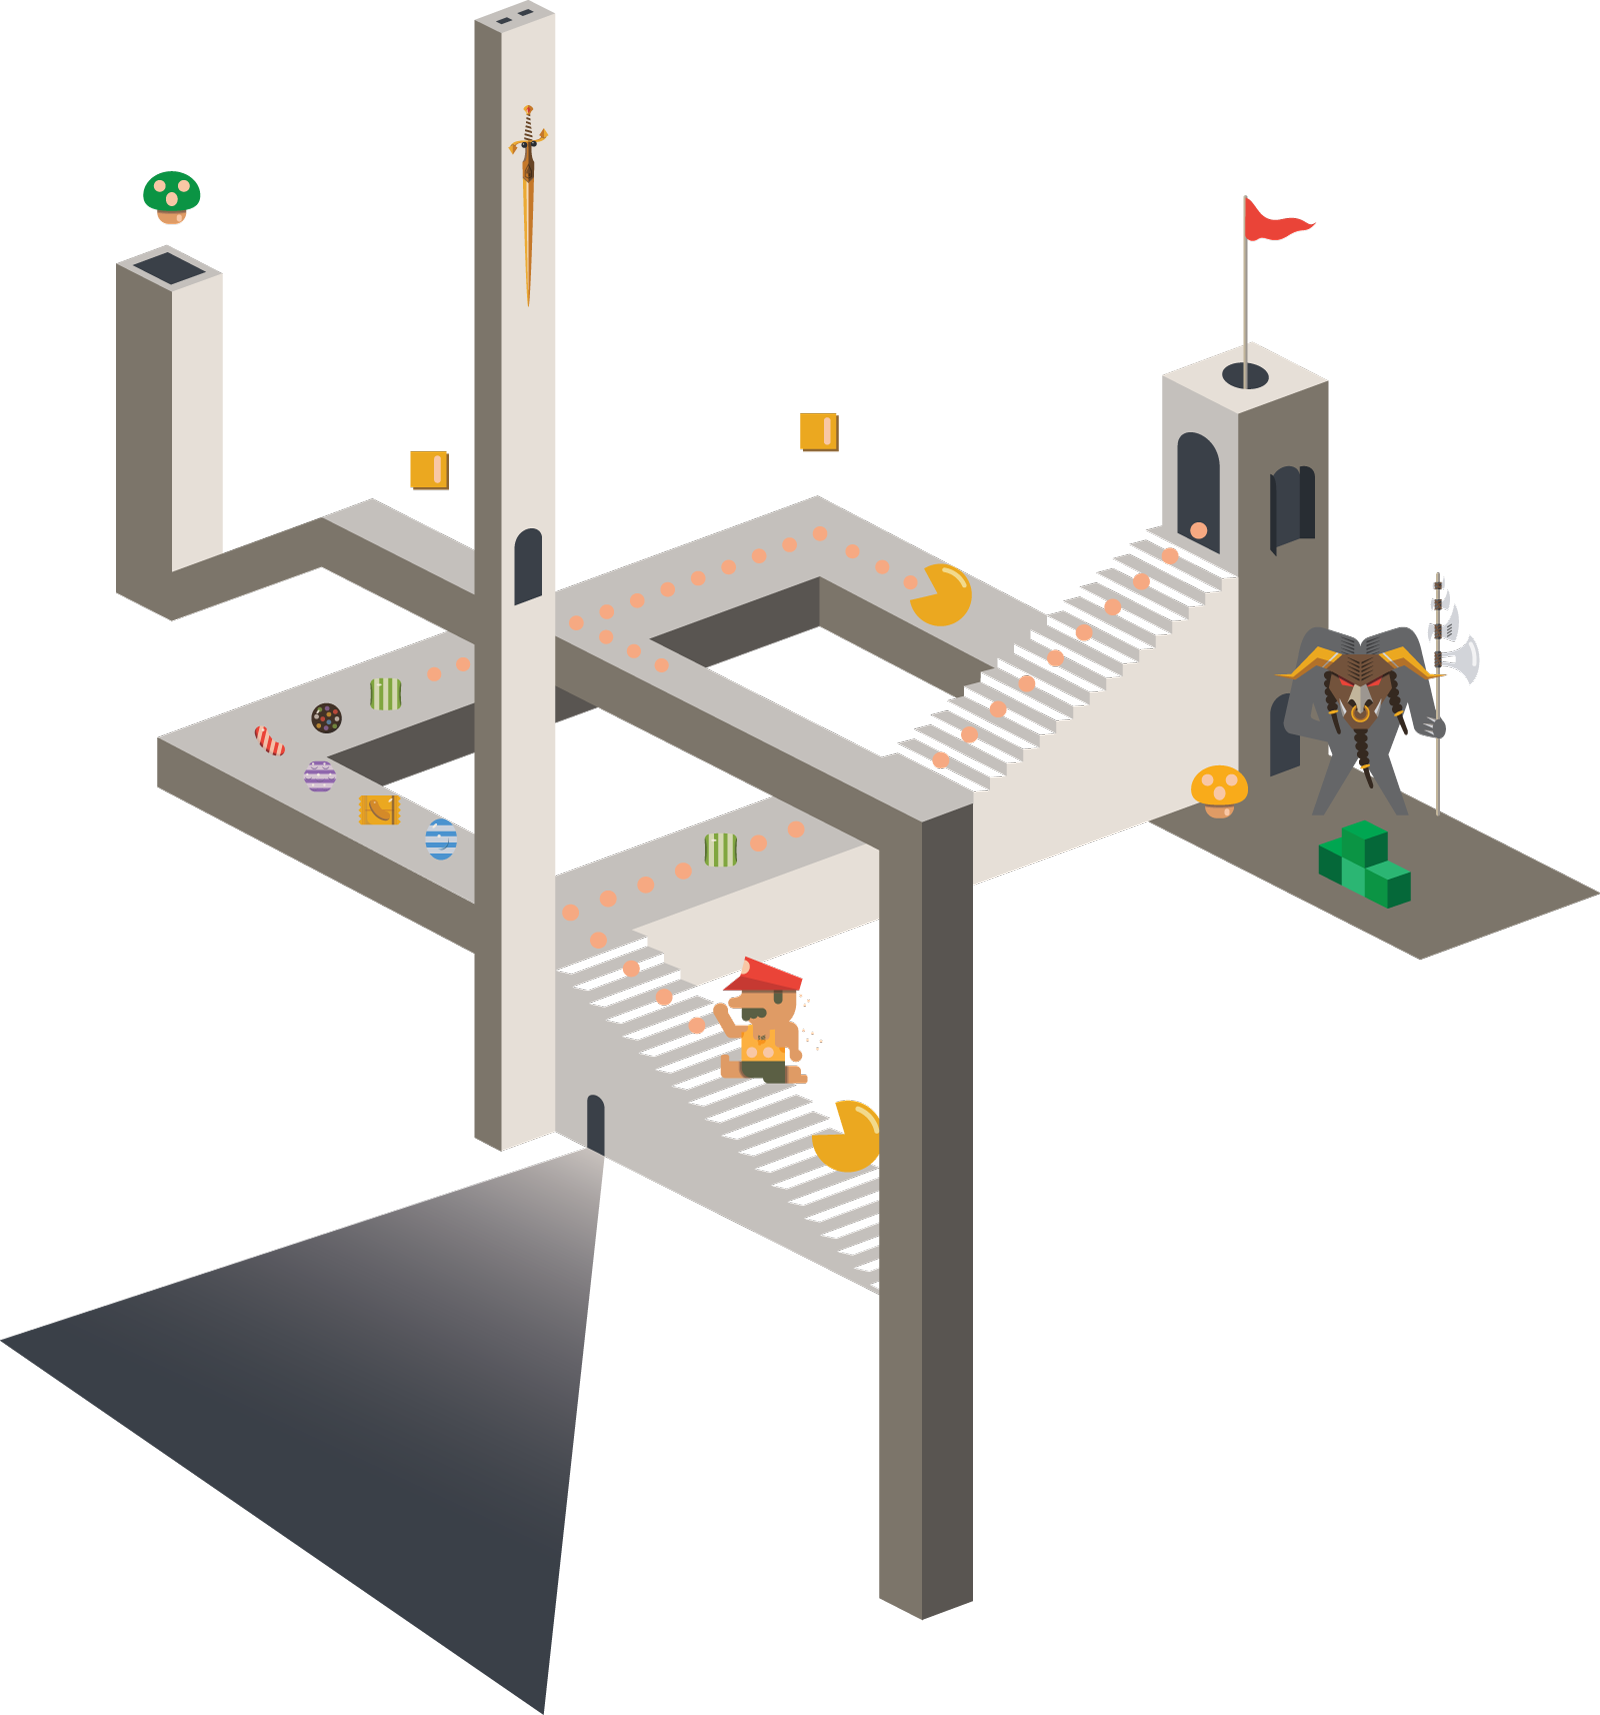 A stylized depiction of the video game Monument Valley with other video game characters and imagery